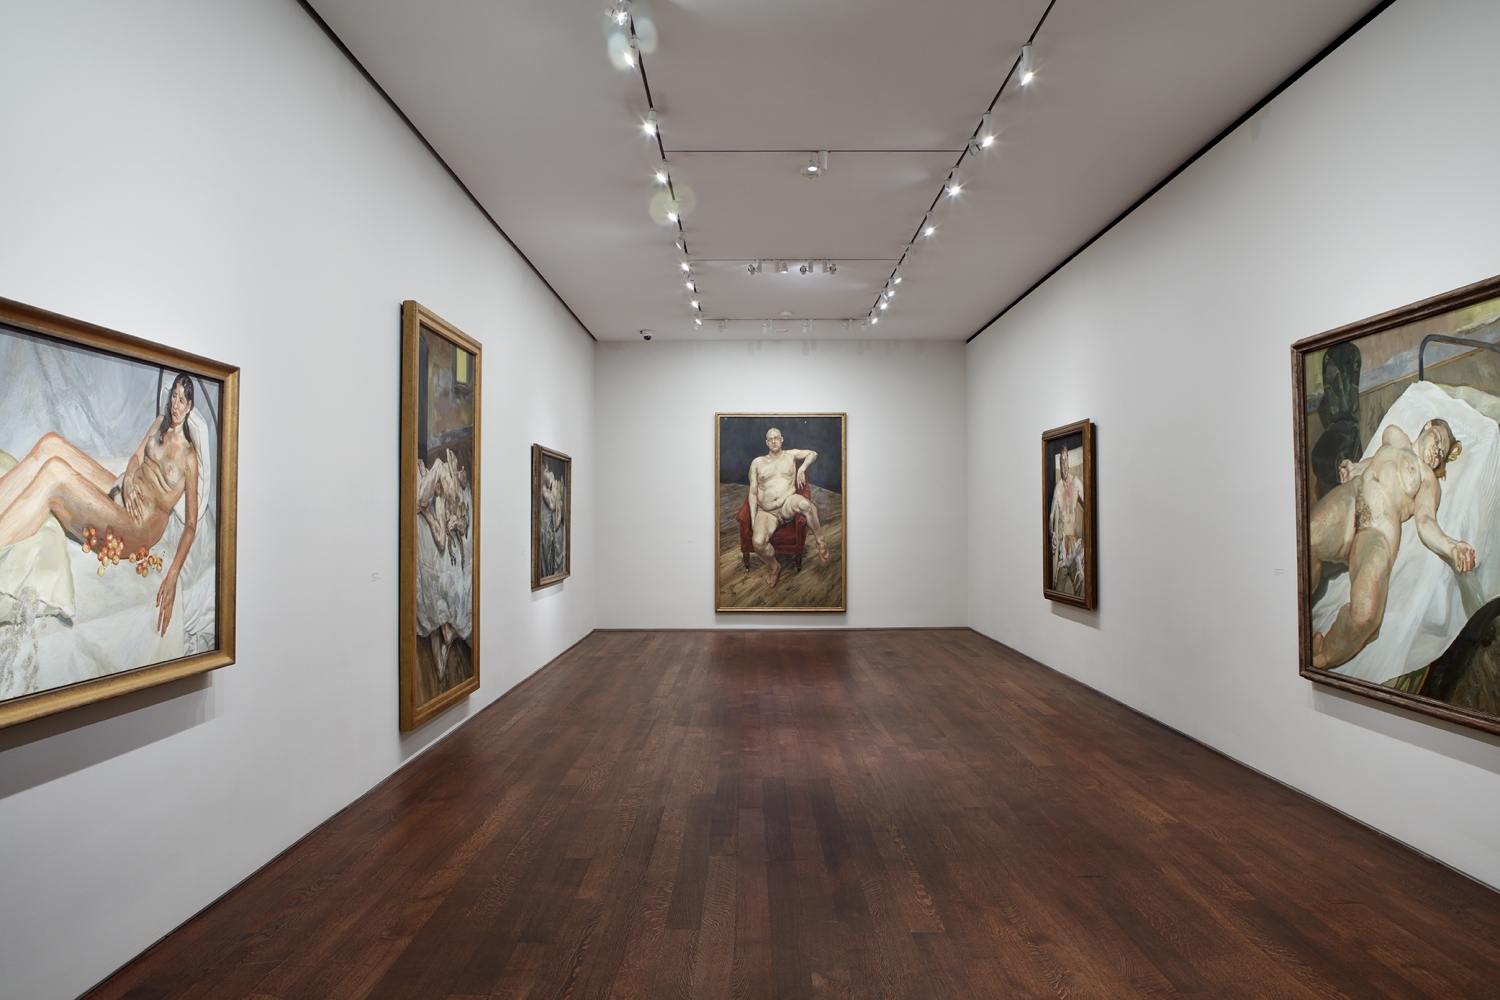 Installation view of&nbsp;Lucian Freud: Monumental&nbsp;at Acquavella Galleries from April 5&ndash;May 24, 2019. Left to right:&nbsp;Irish Woman on a Bed,&nbsp;2003-04, Lent by&nbsp;Private Collection;&nbsp;Sunny Morning&mdash;Eight Legs,&nbsp;1997, Lent by&nbsp;The Art Institute of Chicago; Joseph Winterbotham Collection (1997.561);&nbsp;Portrait on Gray Cover,&nbsp;1996, Lent by&nbsp;Private Collection;&nbsp;Leigh Bowery (Seated),&nbsp;1990, Lent by&nbsp;Private Collection;&nbsp;Eli and David,&nbsp;2005-06, Lent by&nbsp;Private Collection;&nbsp;Naked Portrait with Green Chair,&nbsp;1999, Lent by&nbsp;Private Collection.&nbsp;Photo by Kent Pell. Art&nbsp;&copy; The Lucian Freud Archive / Bridgeman Images.